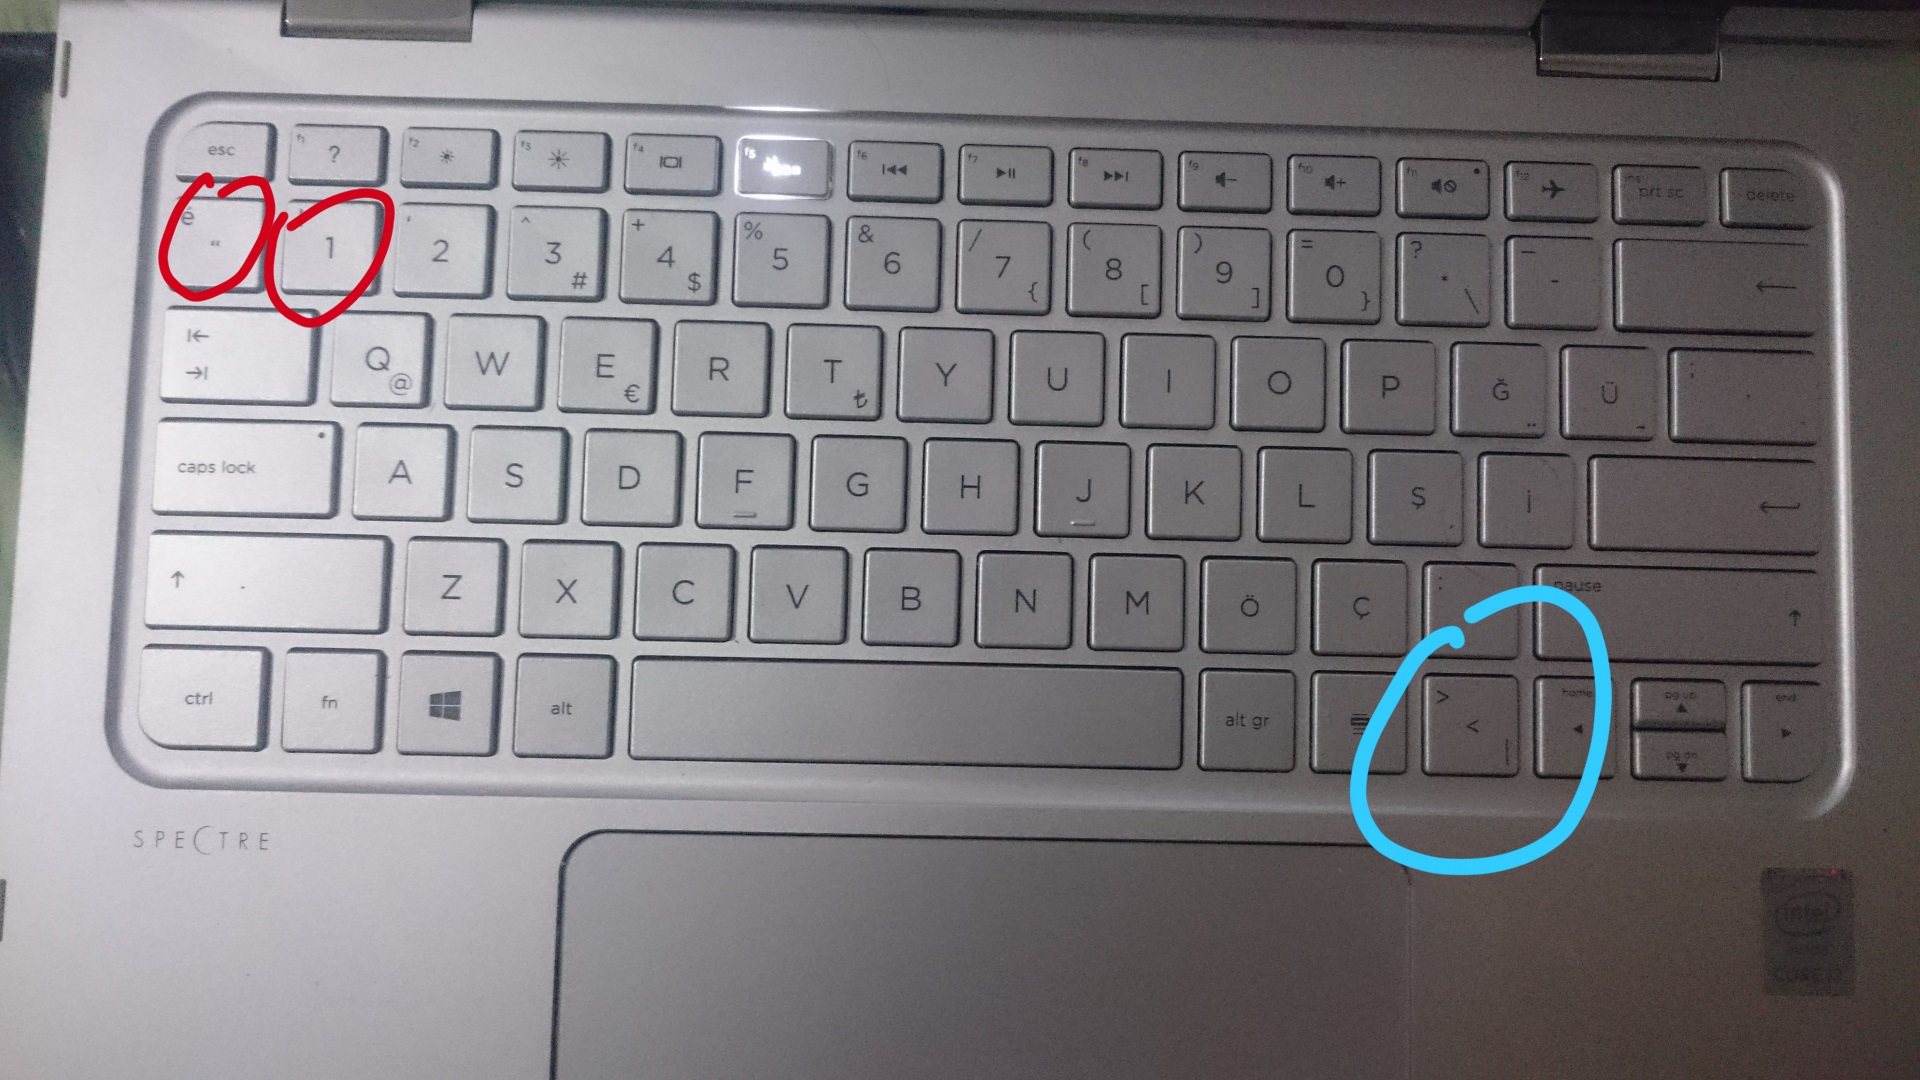 Angle brackets key not working on keyboard after updates - HP ...